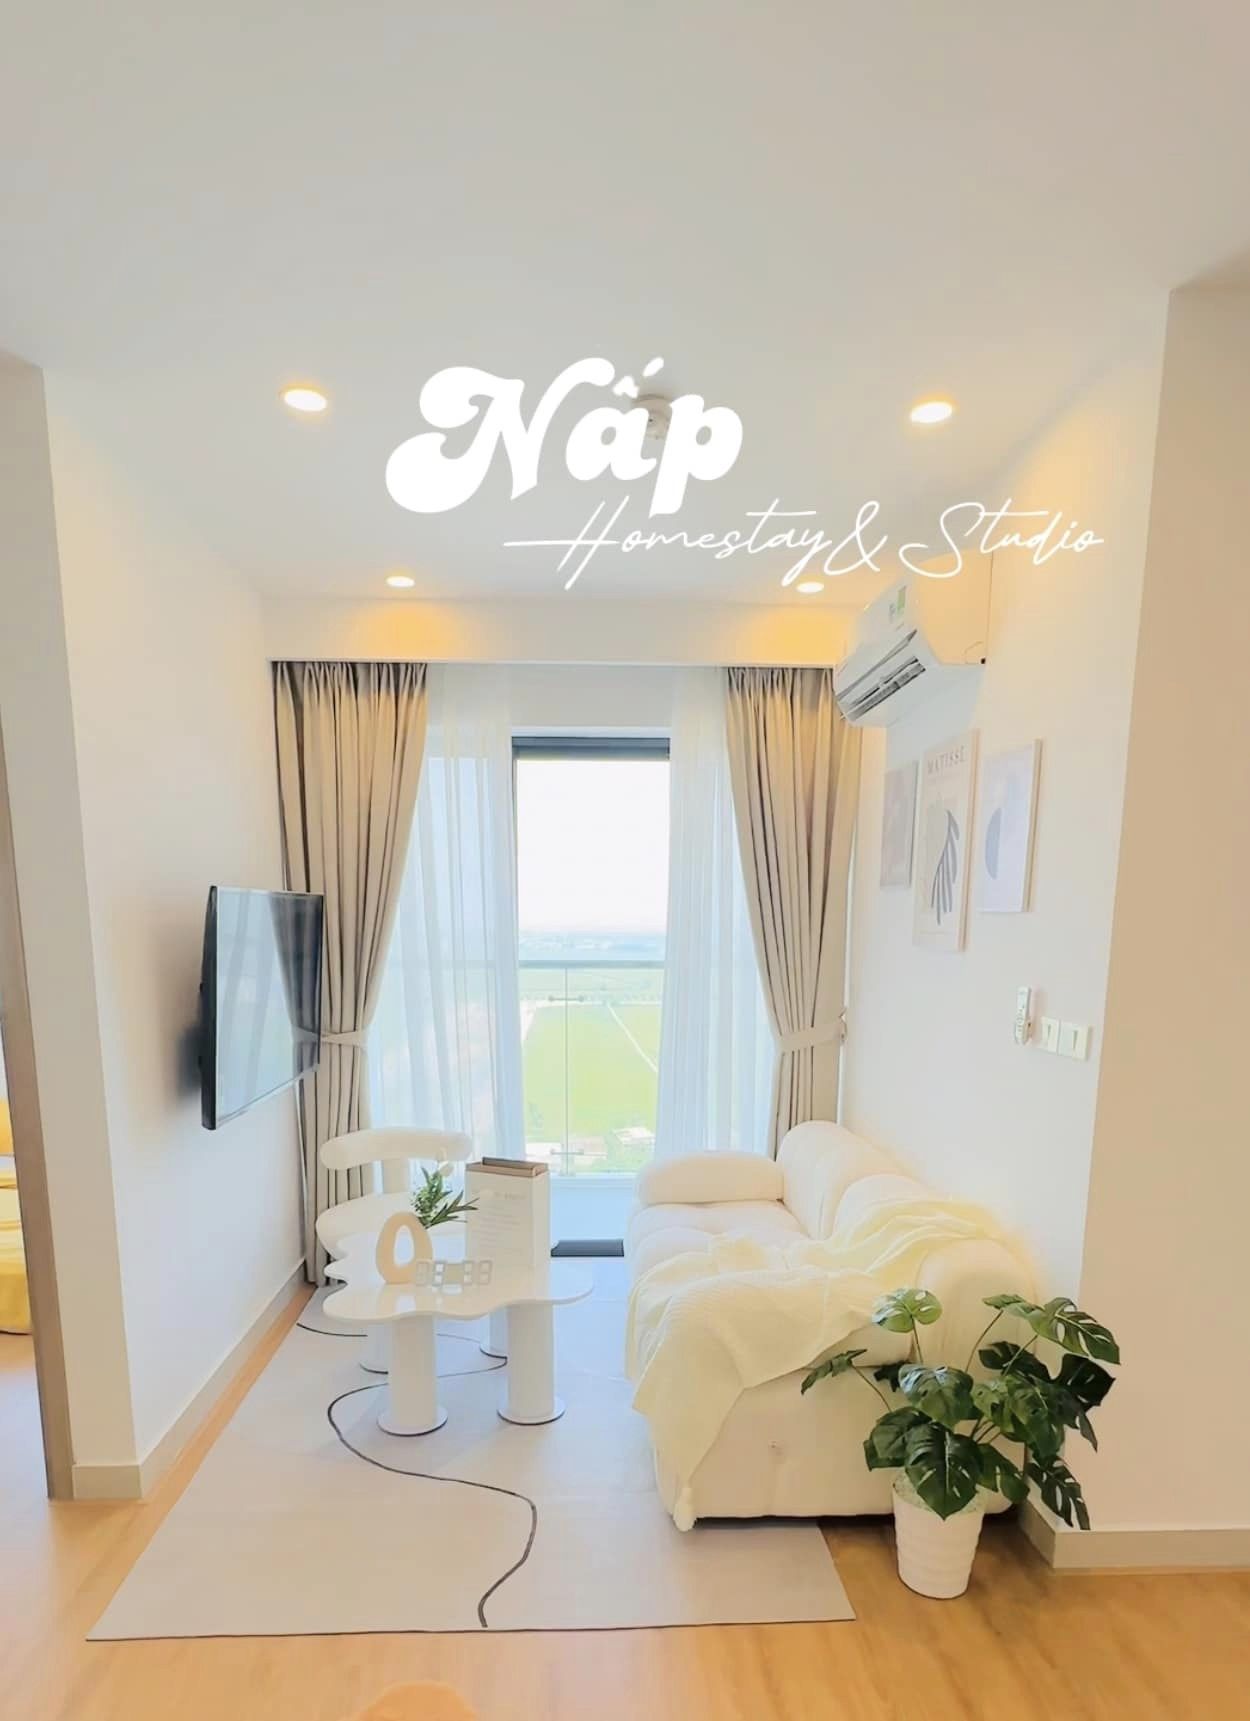 Nấp 1 Homestay and Studio